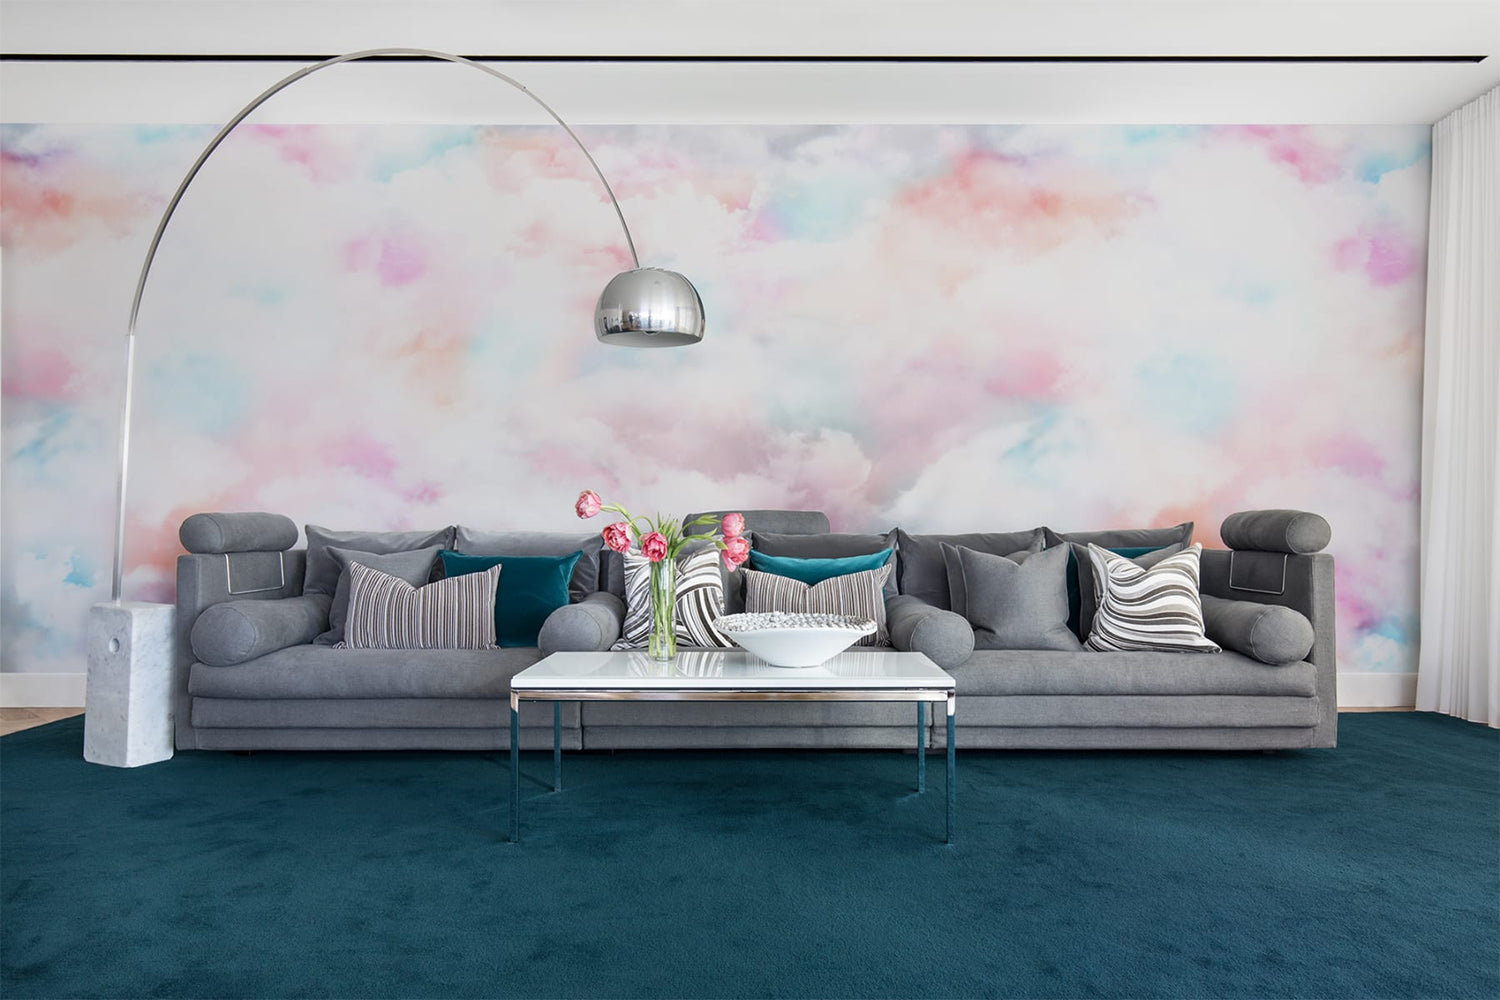 Bubble Gum Clouds, Pastel Mural Wallpaper as seen on the wall of a living area with brown sofa, multiple pillows and a felt floor mat